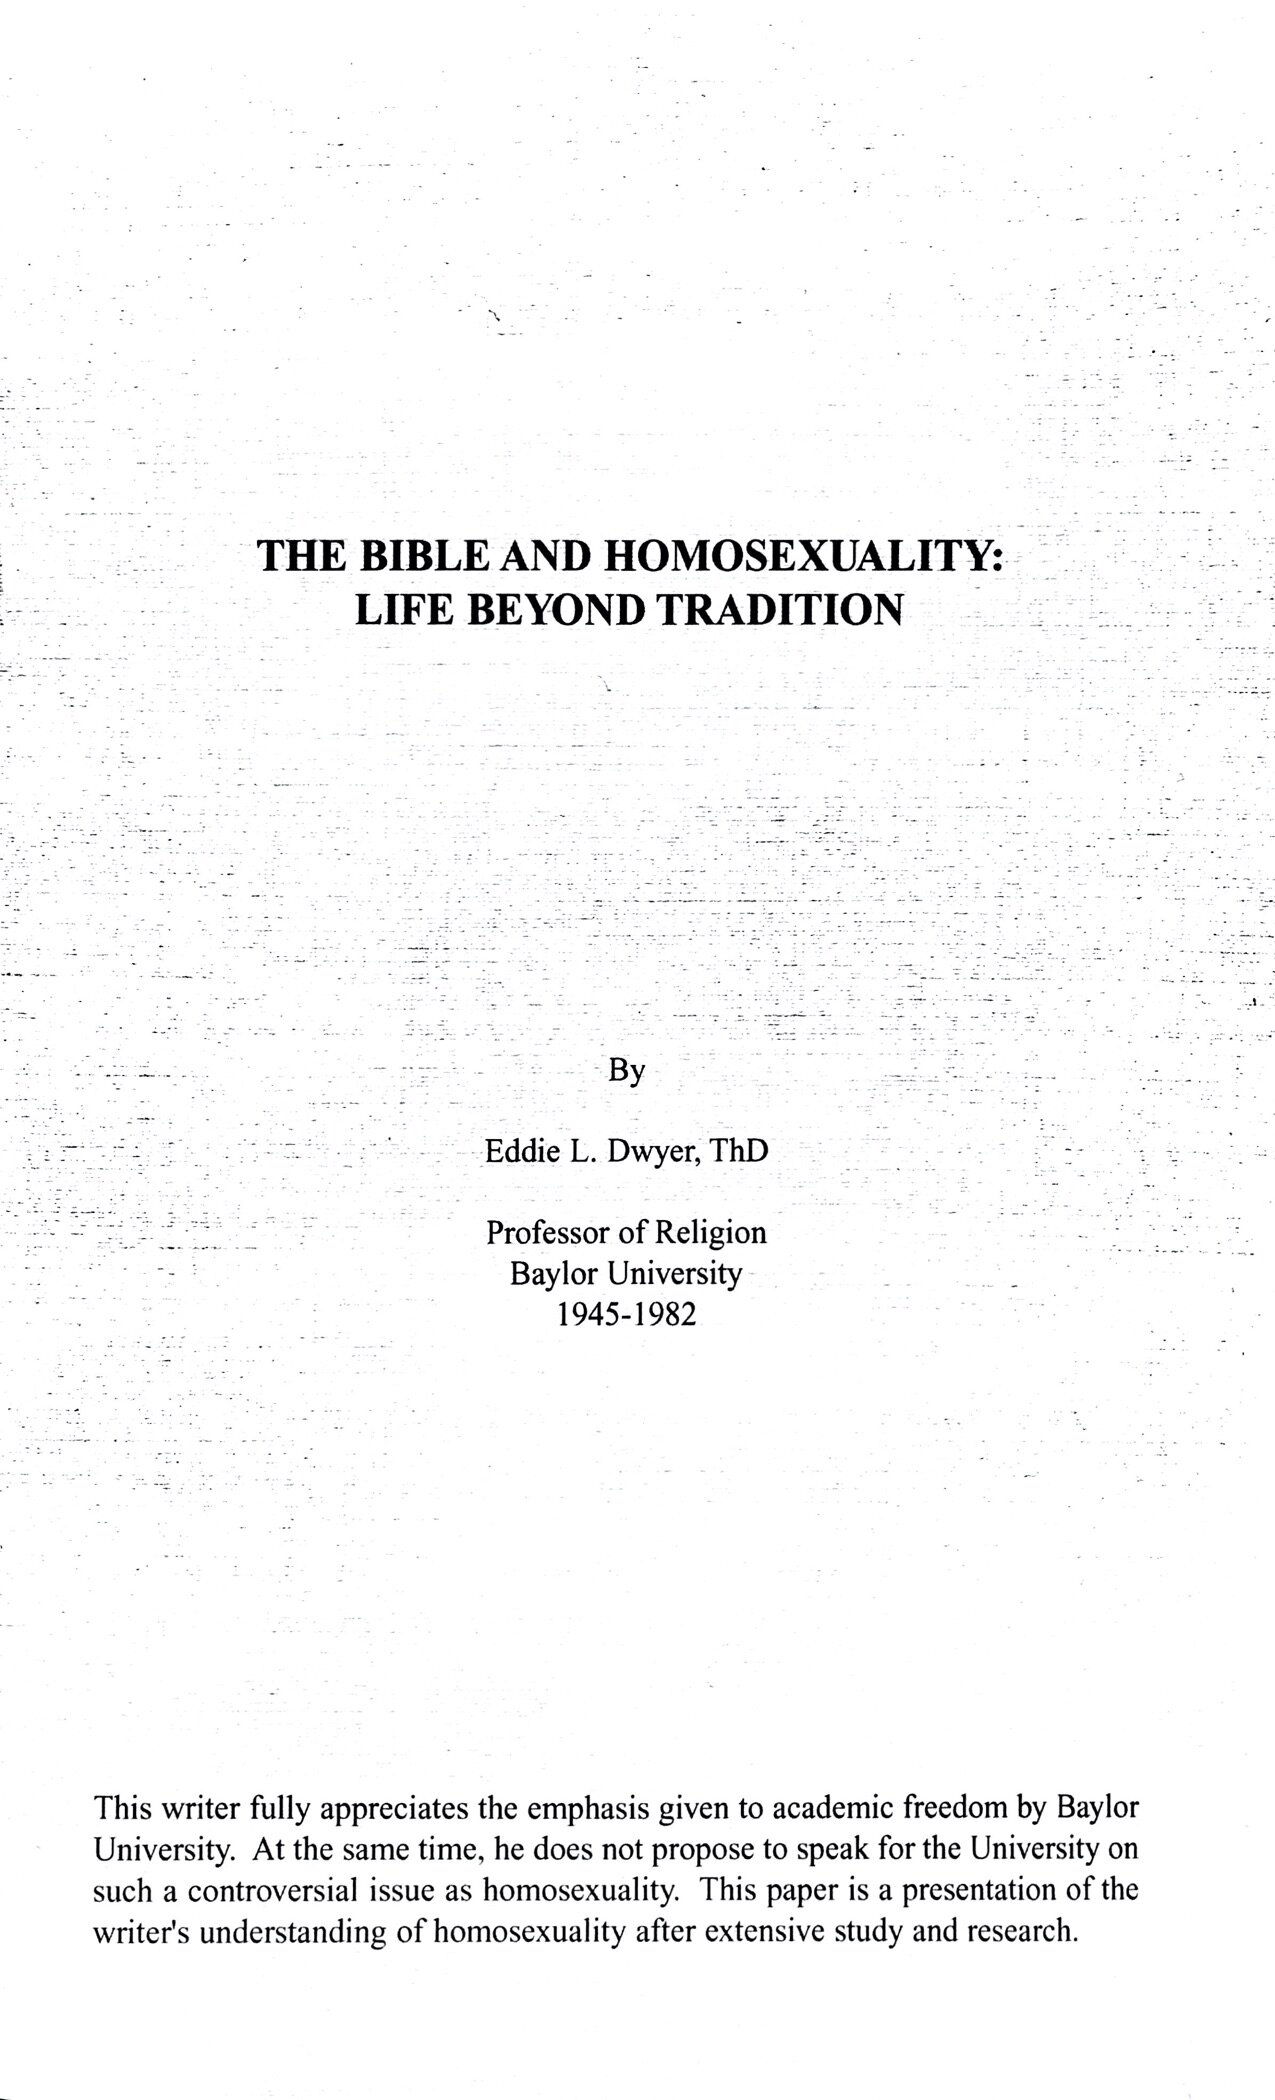 Dr. Eddie Dwyer Essay on The Bible and Homosexuality.jpg